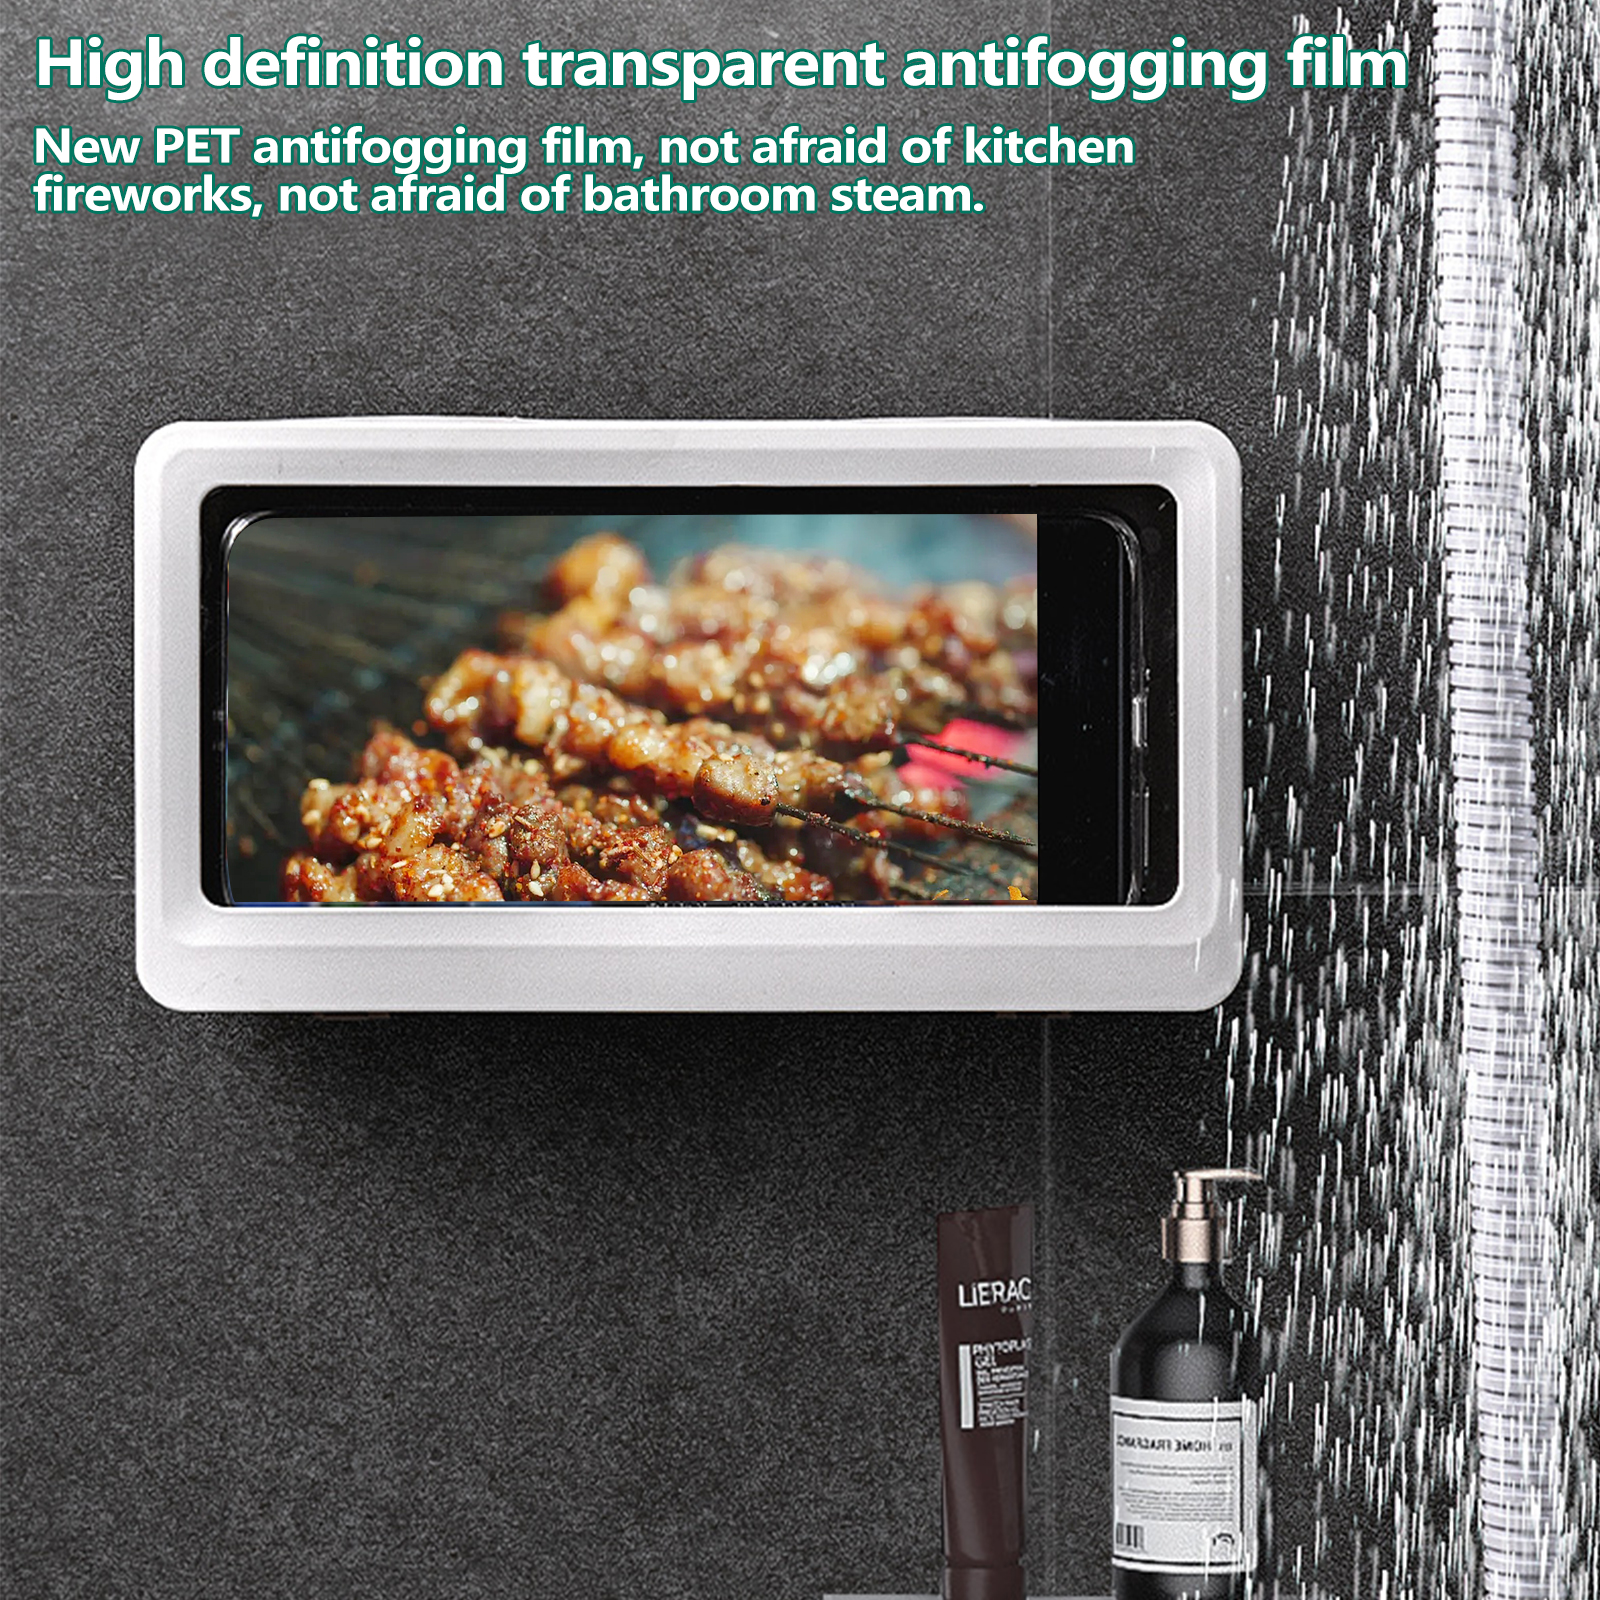 Liner Tablet Or Phone Holder Waterproof Case Box Wall Mounted All Covered Mobile Phone Shelves Self-Adhesive Shower Accessories